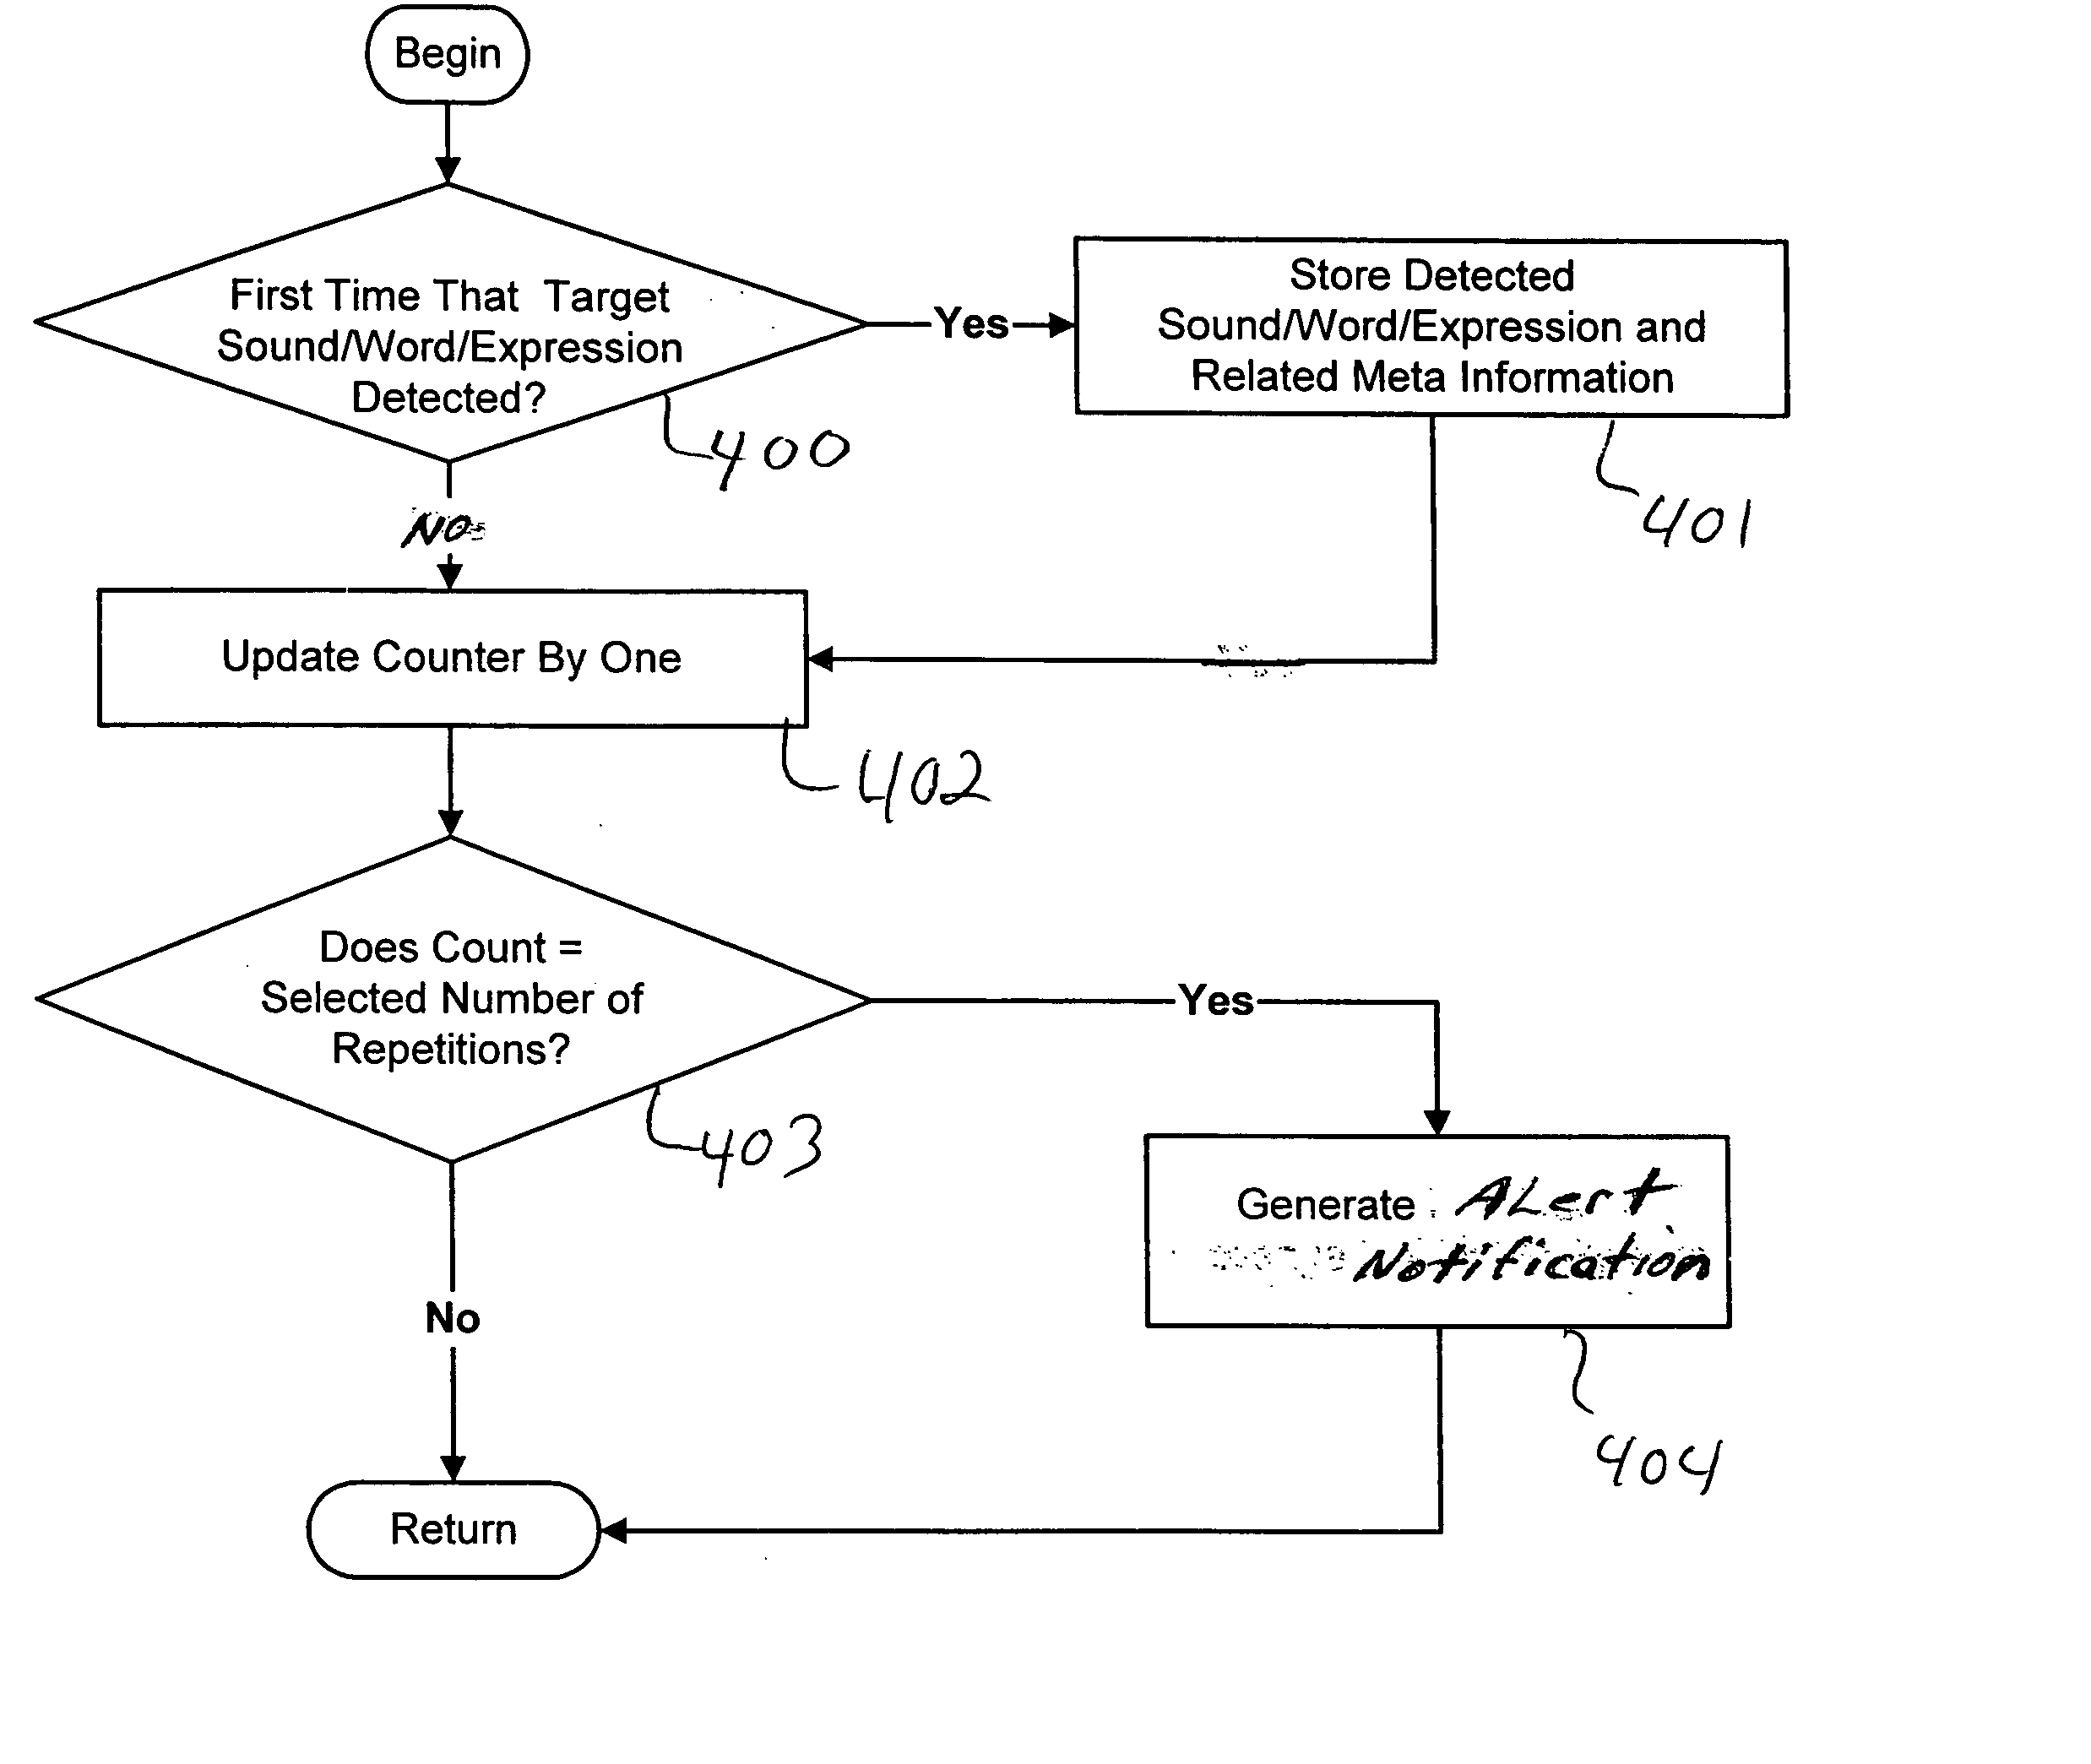 Devices and methods providing automated assistance for verbal communication